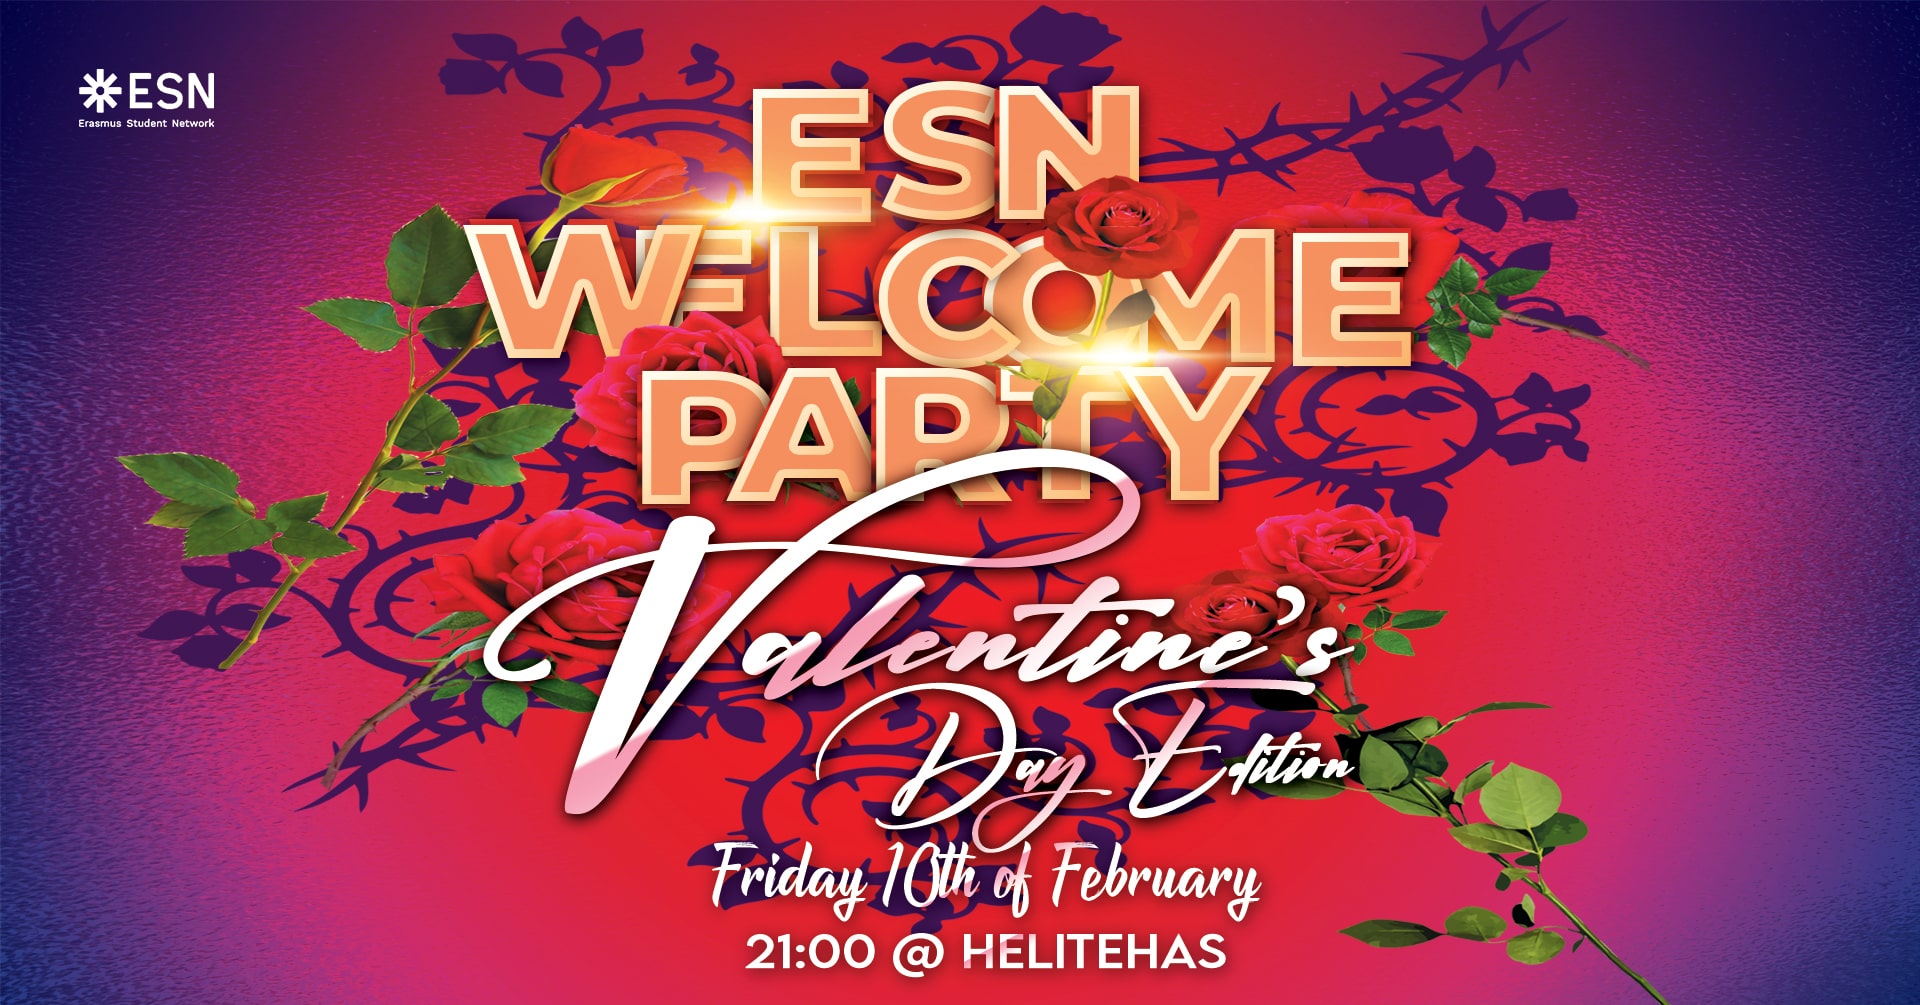 ESN "UV" Welcome Party: Valentine's Day Edition